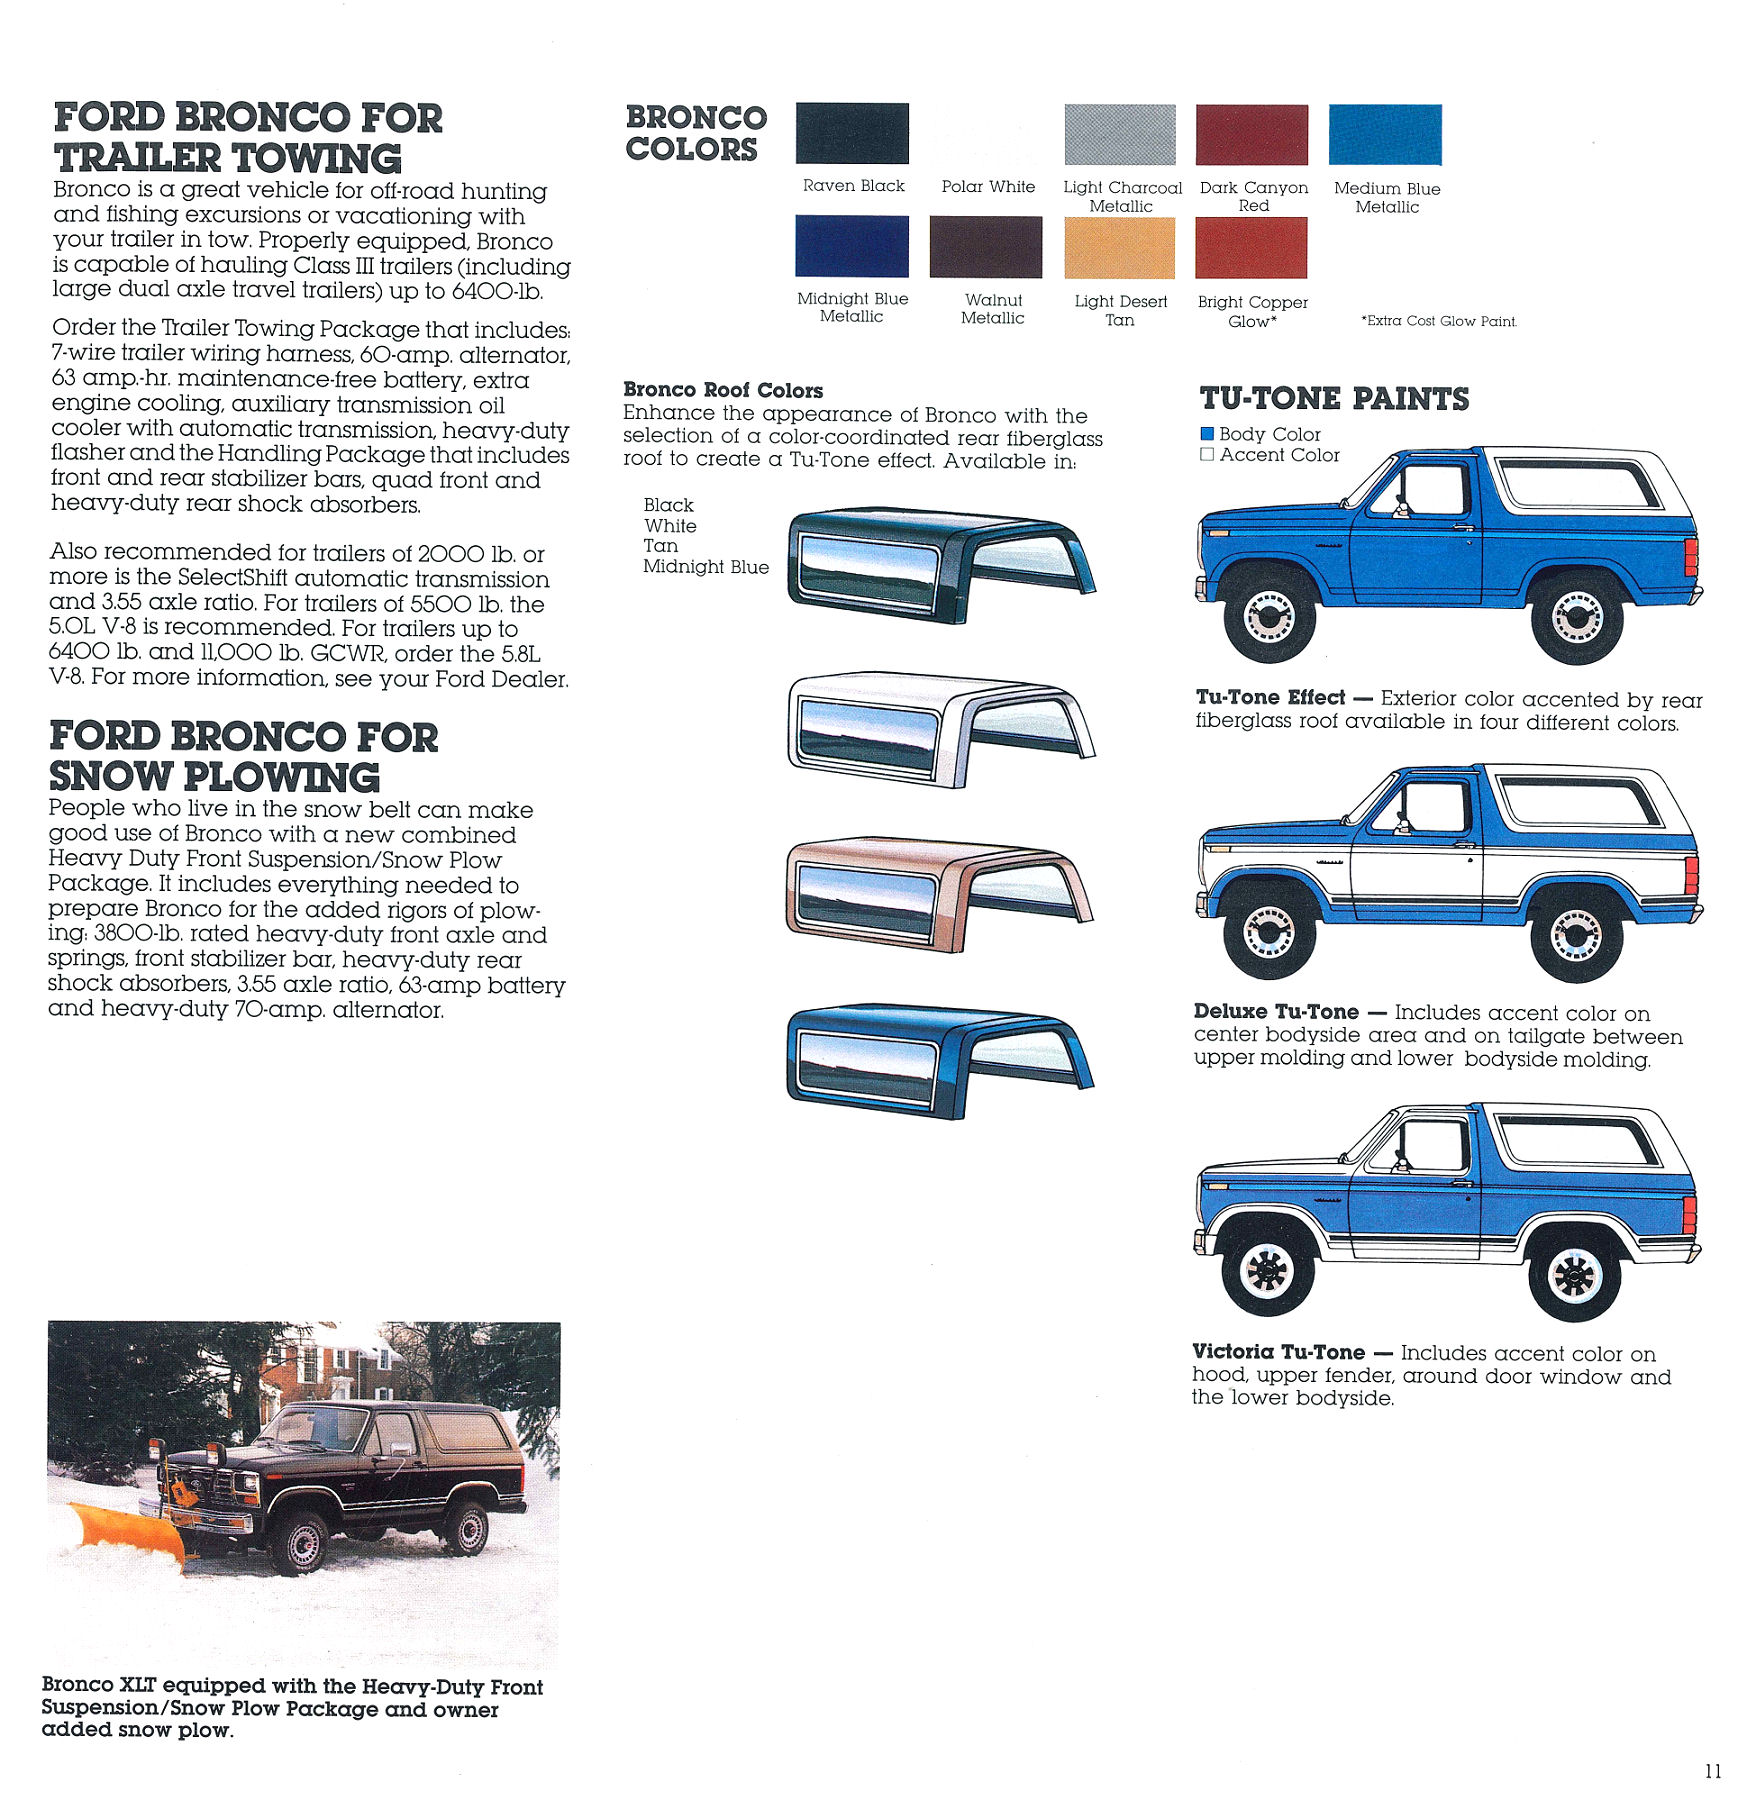 1984 Ford Bronco-11